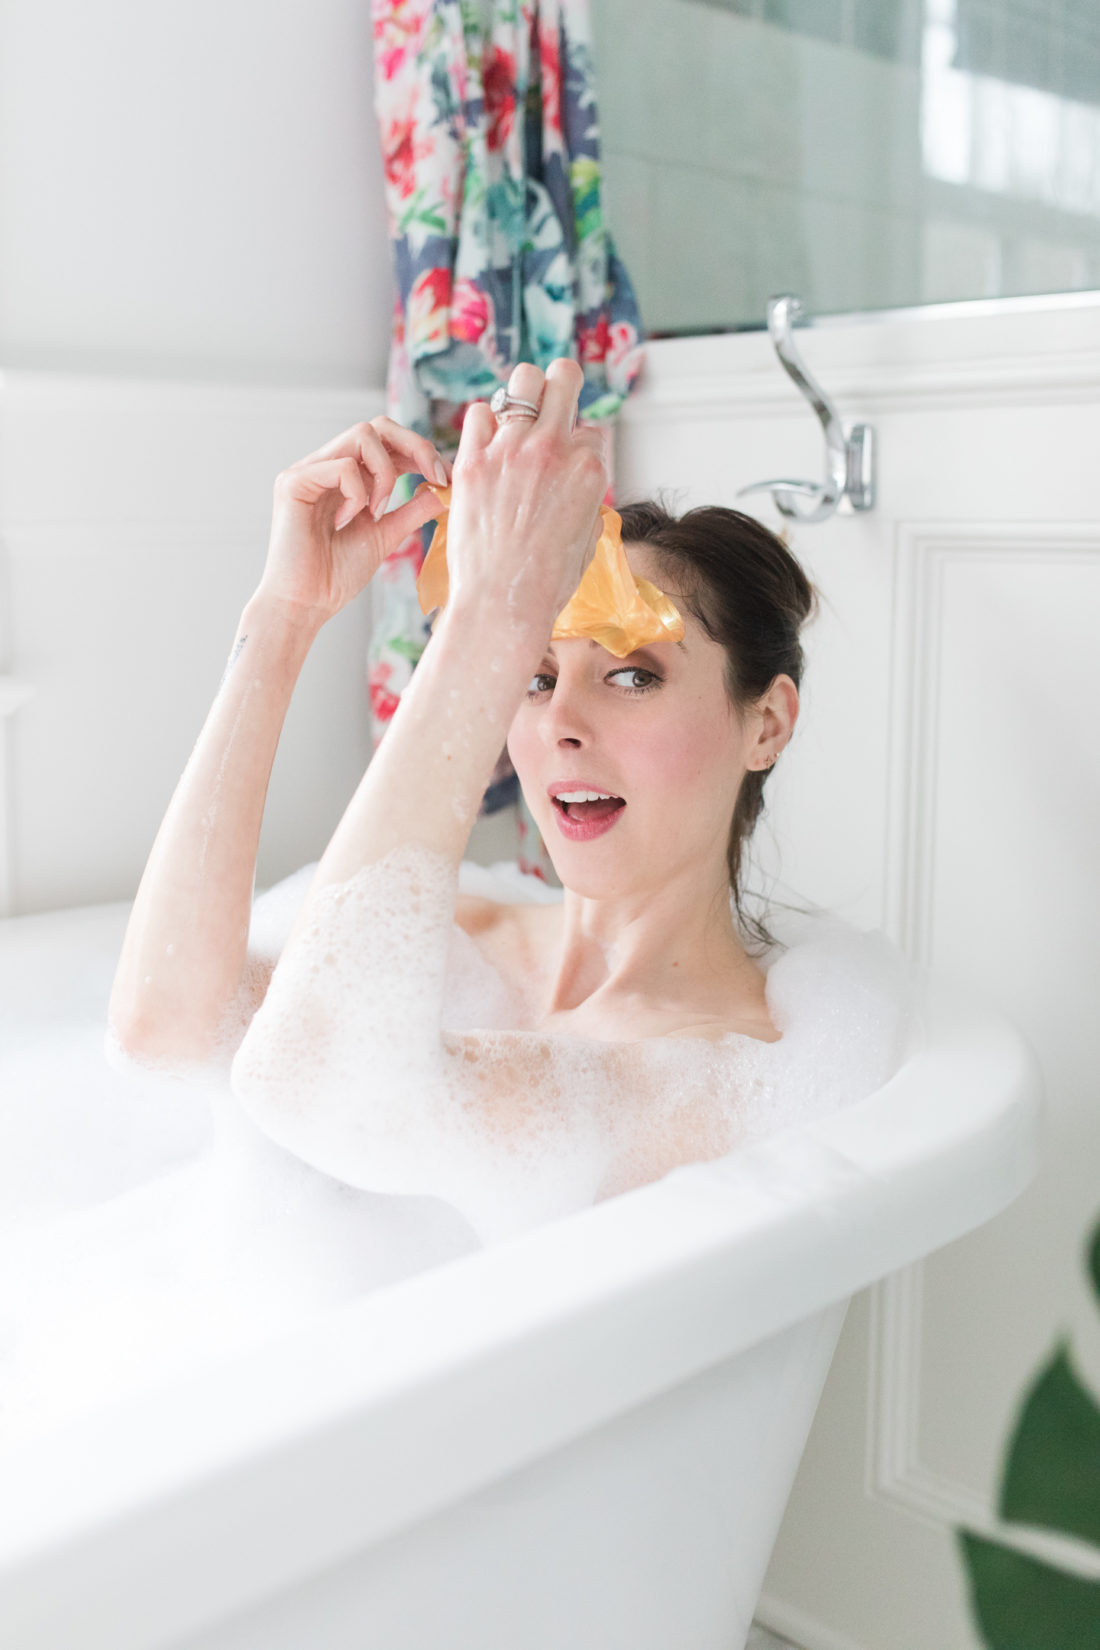 Eva Amurri Martino takes a bubble bath and peeks out from under a 24 karat gold sheet mask